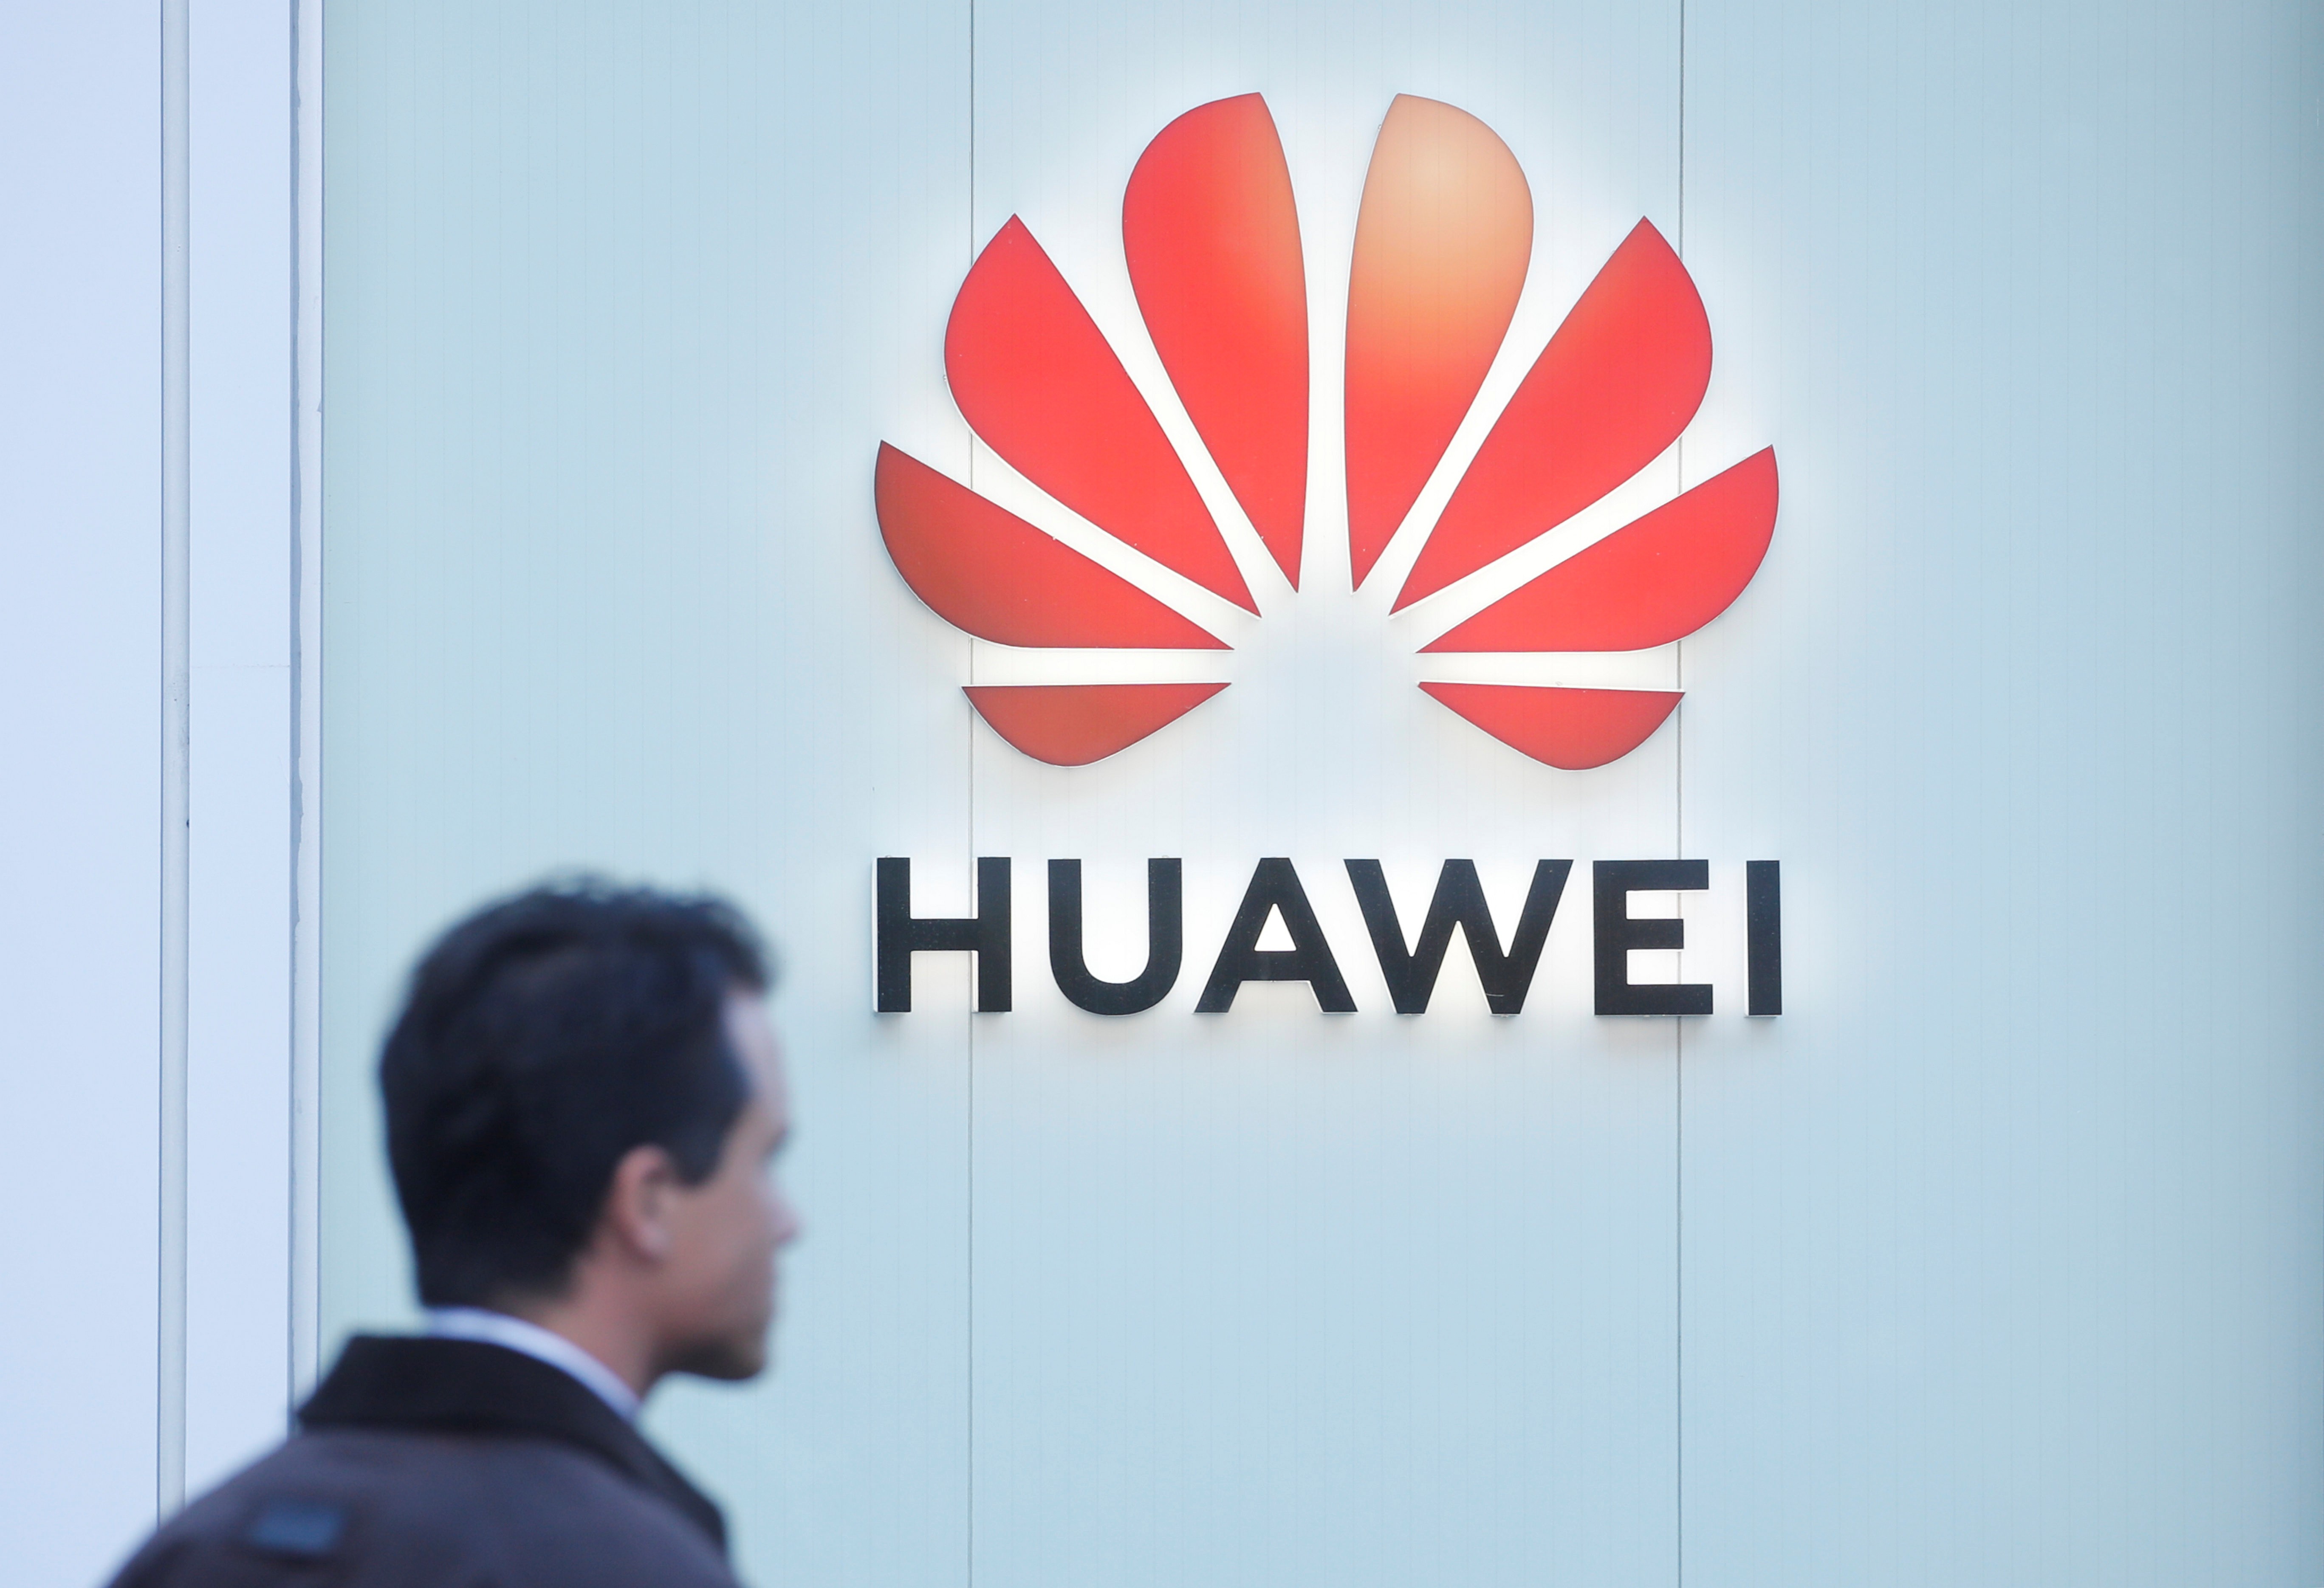 The logo of Huawei is seen in Davos, Switzerland January 22, 2020. Photo: Reuters